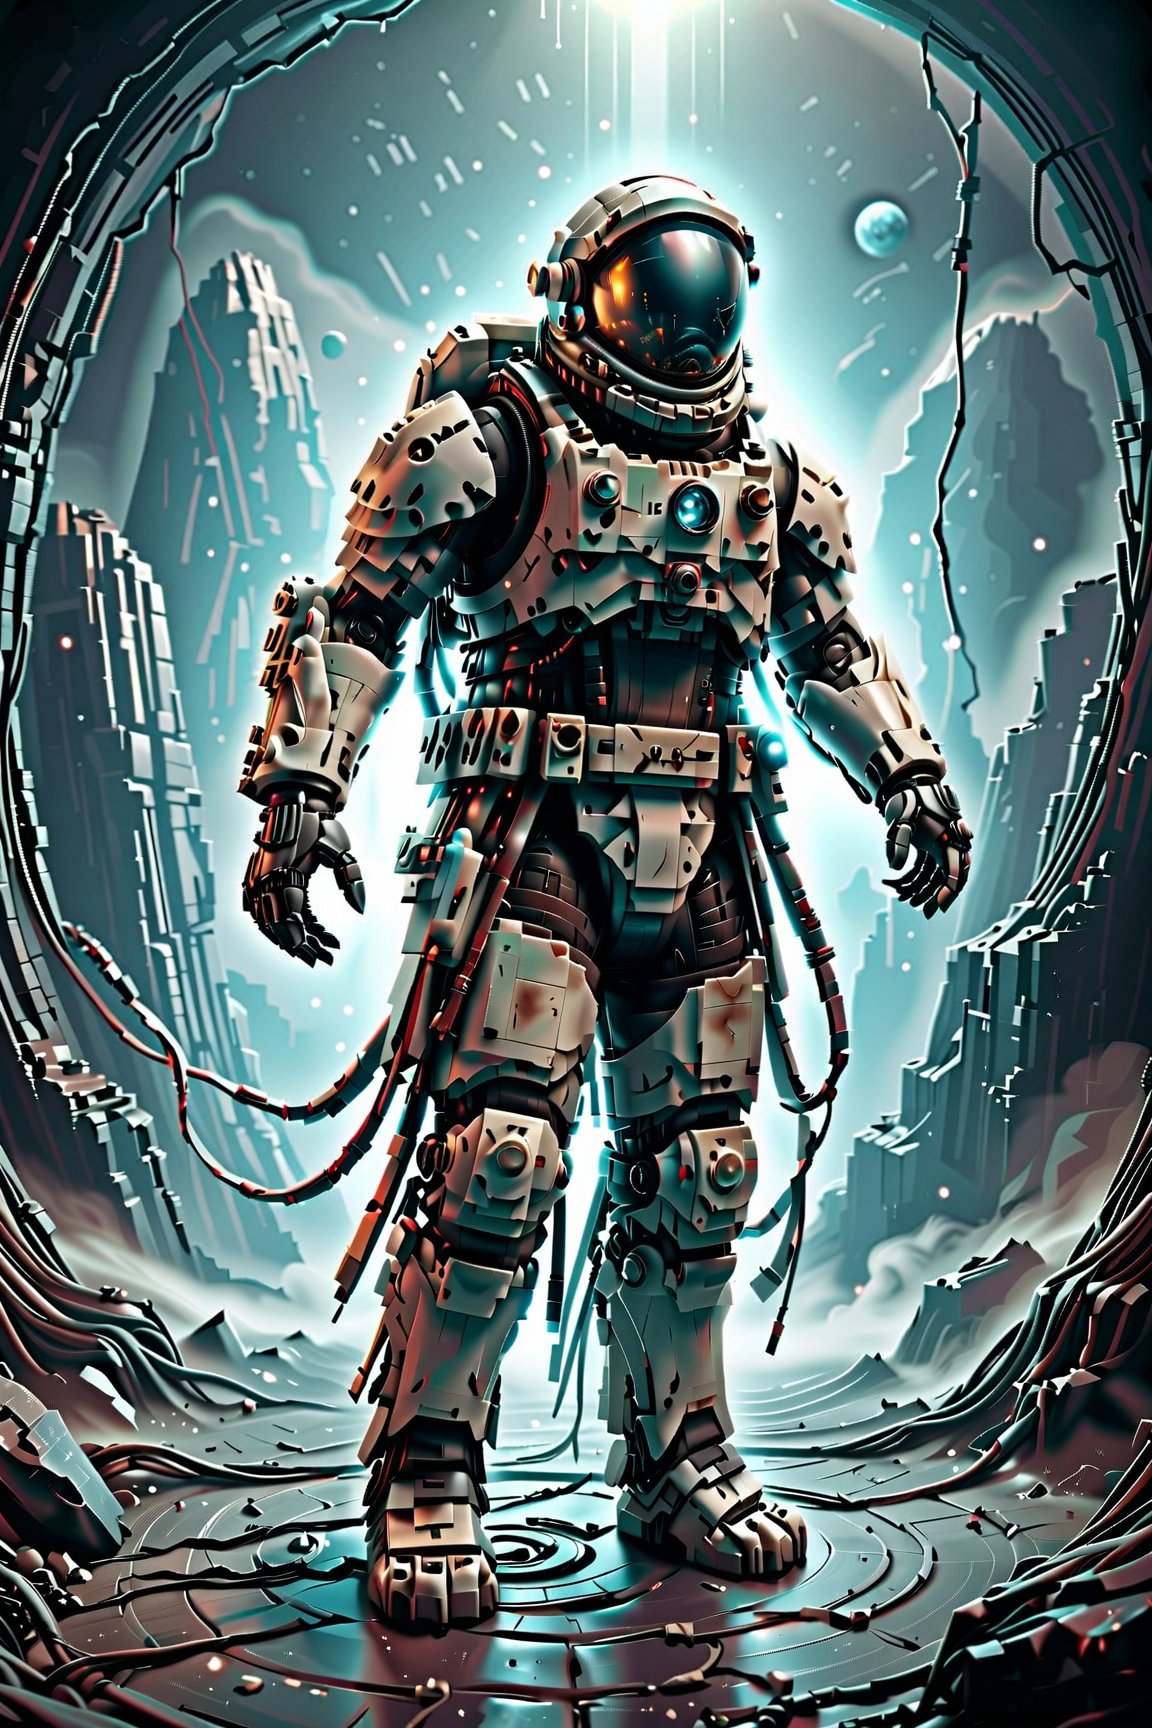 ((masterpiece)), ((best quality)), 8k, high detailed, ultra-detailed, a haunting and ethereal digital painting of A cosmic astronaut traverses the void, seeking answers among the stars. Movie Poster, cinematic light, Professional Art
many details, extreme detailed, full of details, wide range of colors, Dramatic, Dynamic, Cinematic, Sharp details, Insane quality, Insane resolution, Insane details. Masterpiece, 32k resolution. oblivious to the dark and eerie surroundings. The figure is intricately detailed, with delicate looks and a weathered appearance. The composition is dynamic and atmospheric, with muted colors and dramatic lighting, evoking a sense of mystery and foreboding. Inspired by the works of classical painters like Caspar David Friedrich, this artwork captures the captivating and haunting nature of the scene. Created using digital painting techniques and rendered with realistic textures and lighting effects for a stunning and immersive visual experience.,more detail XL,cinematic_grain_of_film,lego,LegendDarkFantasy